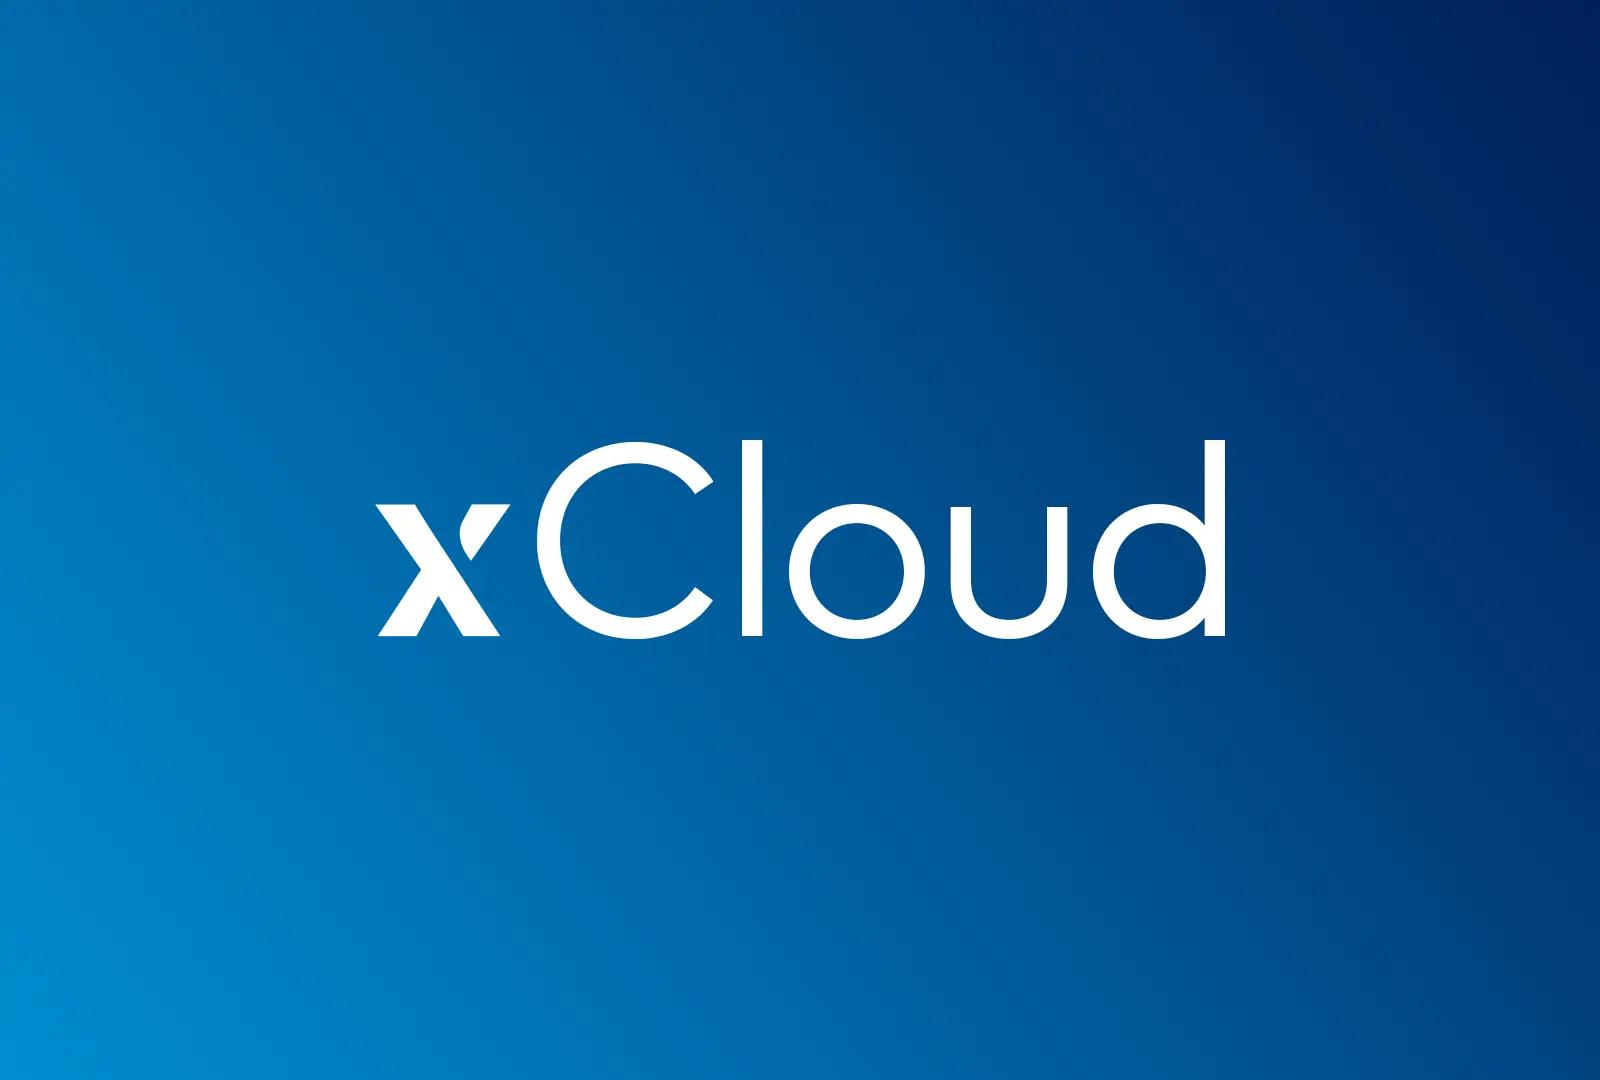 About xCloud